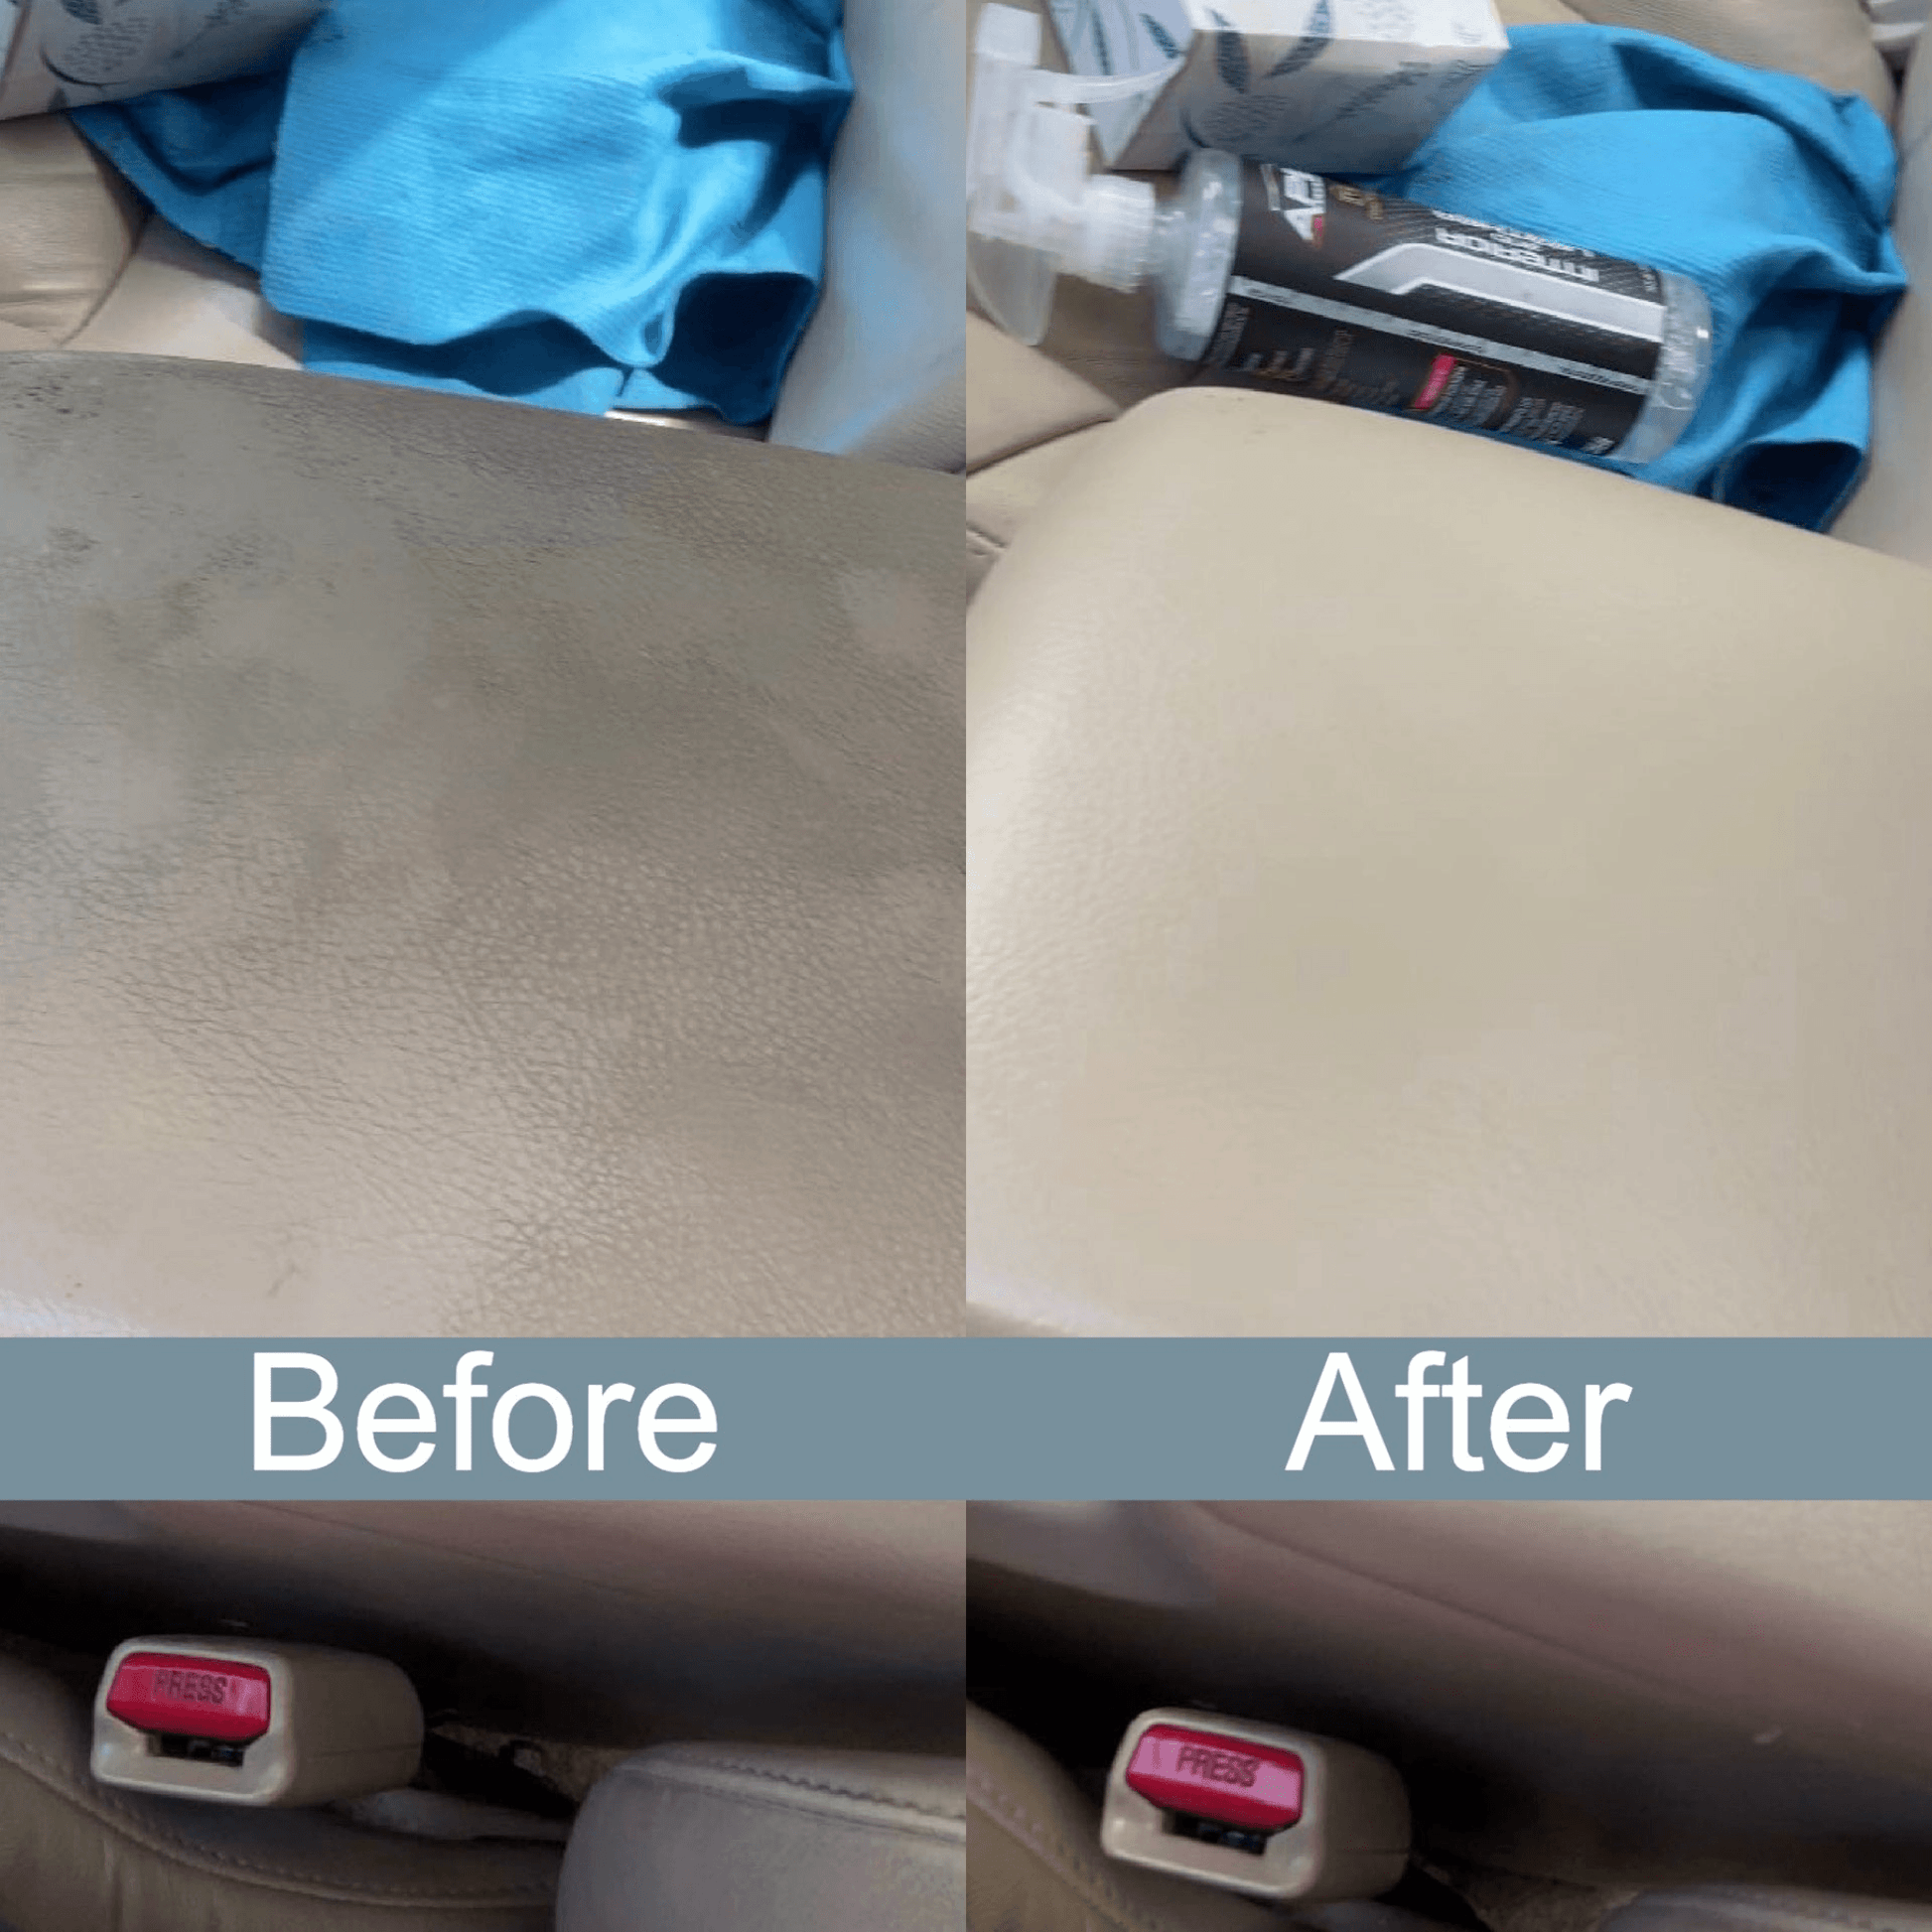 Car Leather Cleaner–  Shop